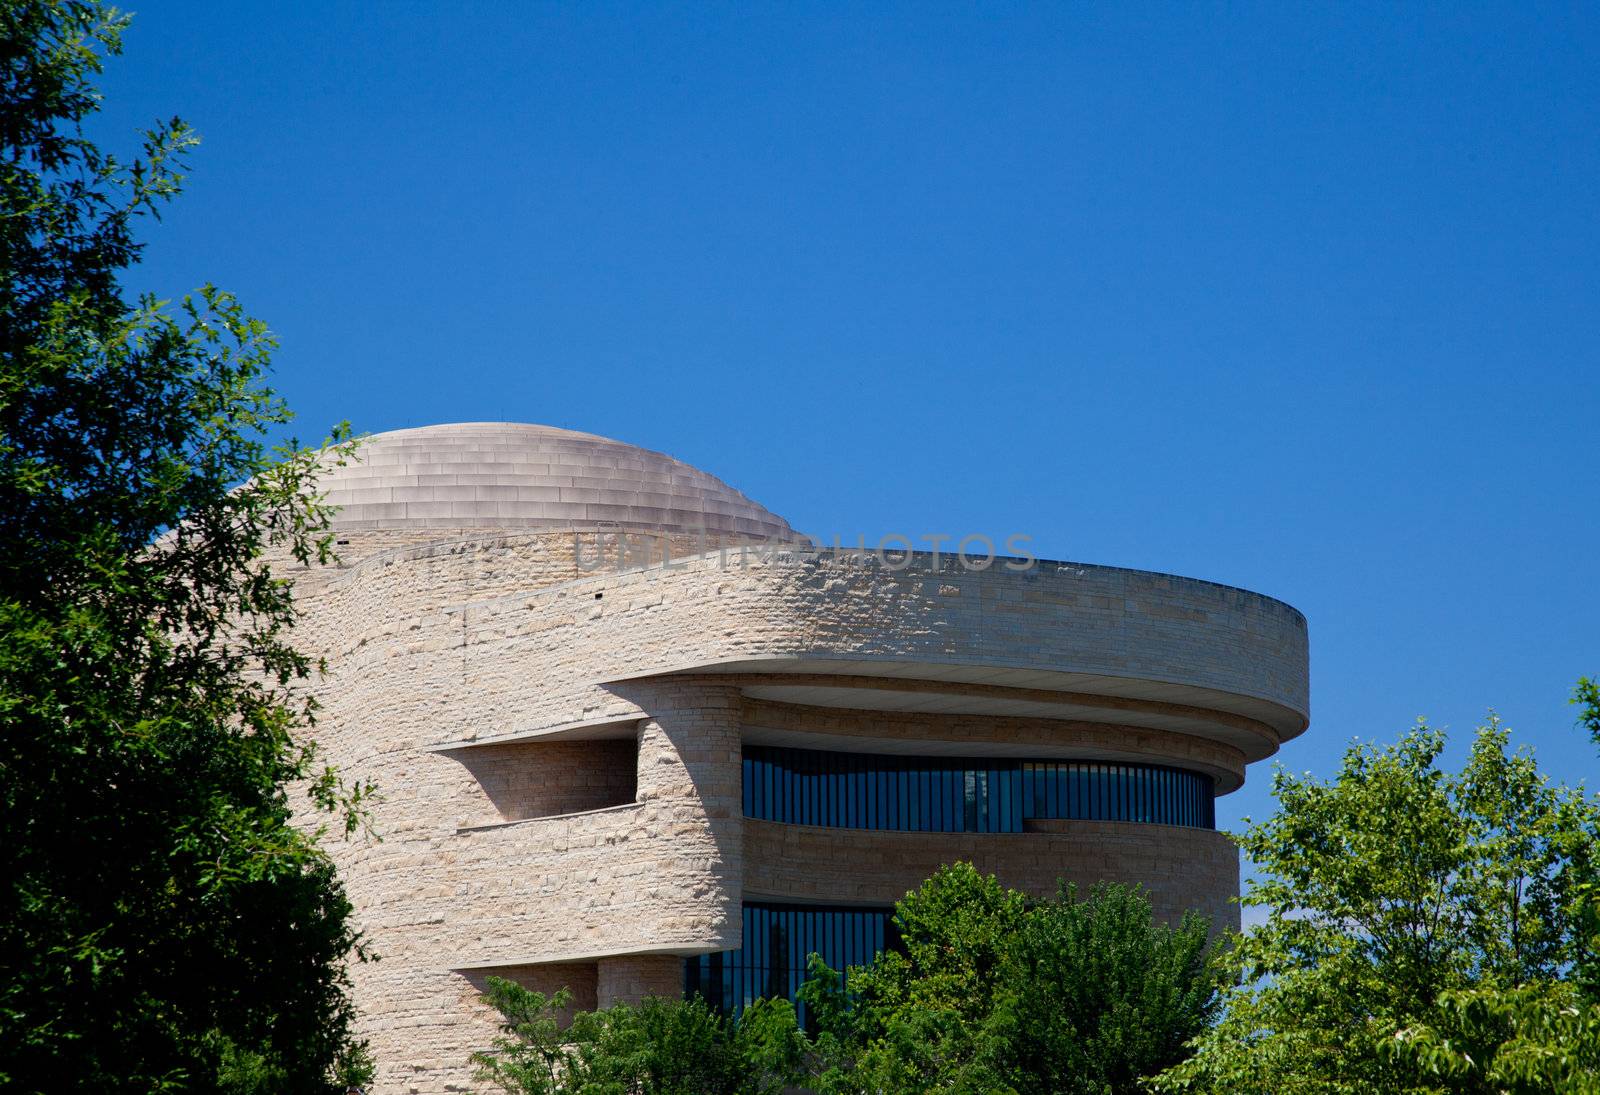 The Museum of the American Indians in Washington DC taken from the tree-filled space of the Botanical Gardens